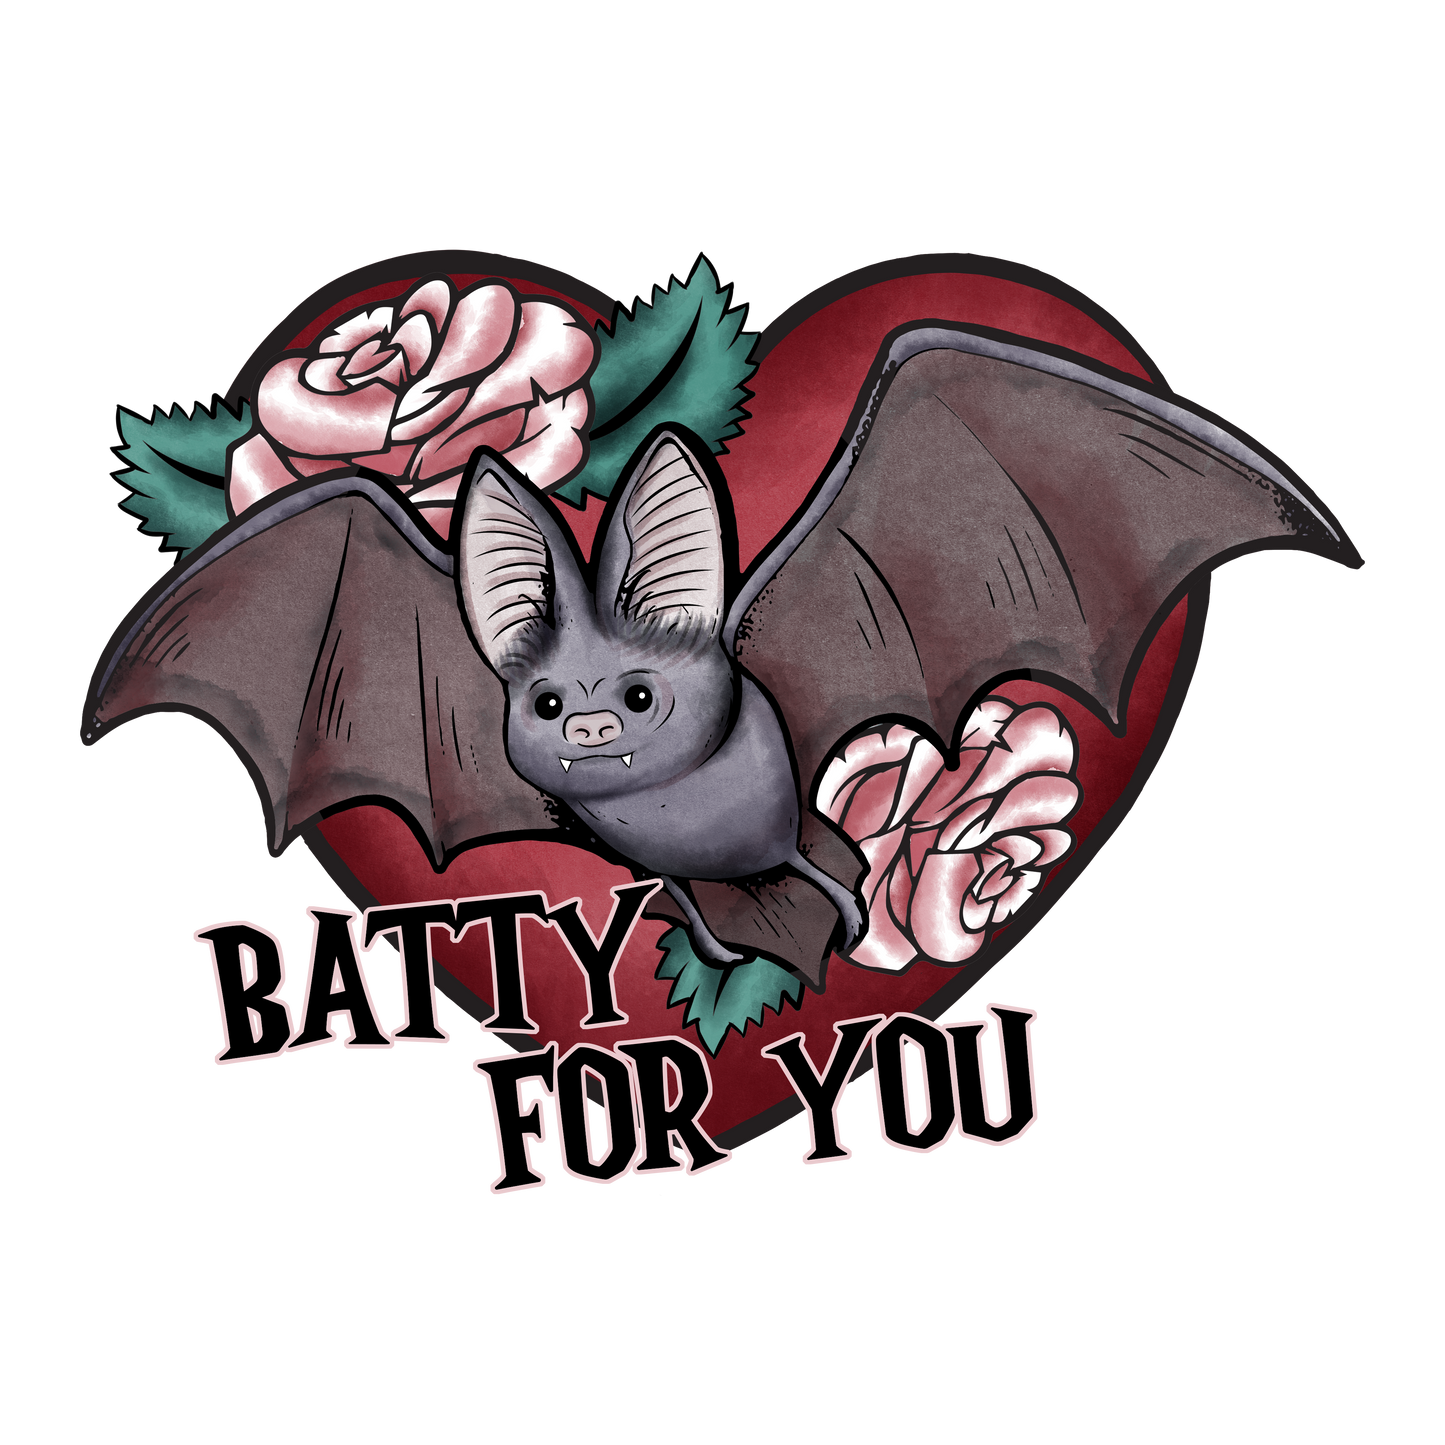 VALENTINE'S DAY PRINT 37 - Batty for you